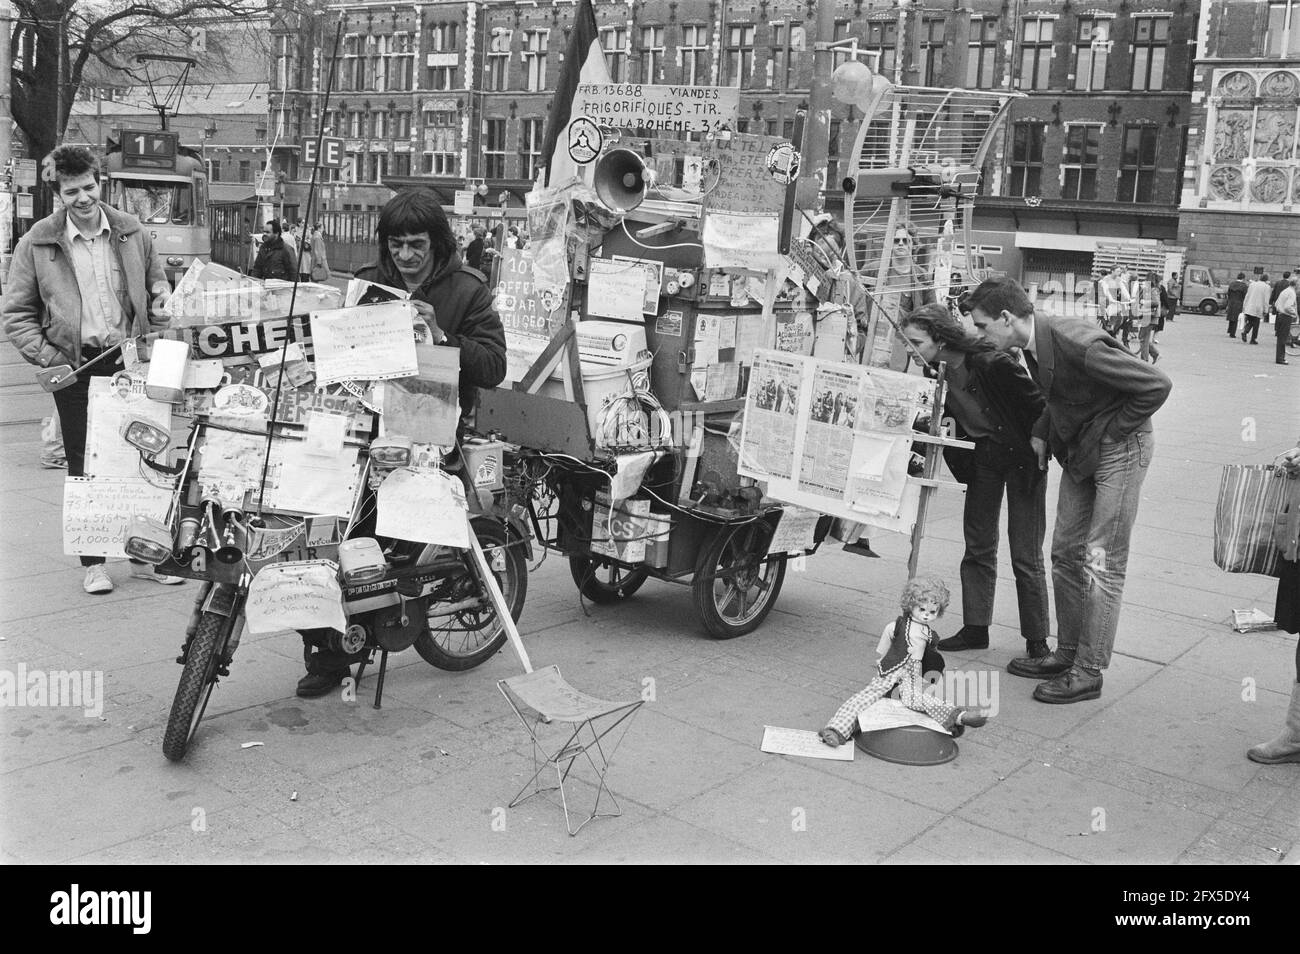 French world traveler Michel Ayrault with moped-drawn vehicle, April 19, 1984, The Netherlands, 20th century press agency photo, news to remember, documentary, historic photography 1945-1990, visual stories, human history of the Twentieth Century, capturing moments in time Stock Photo